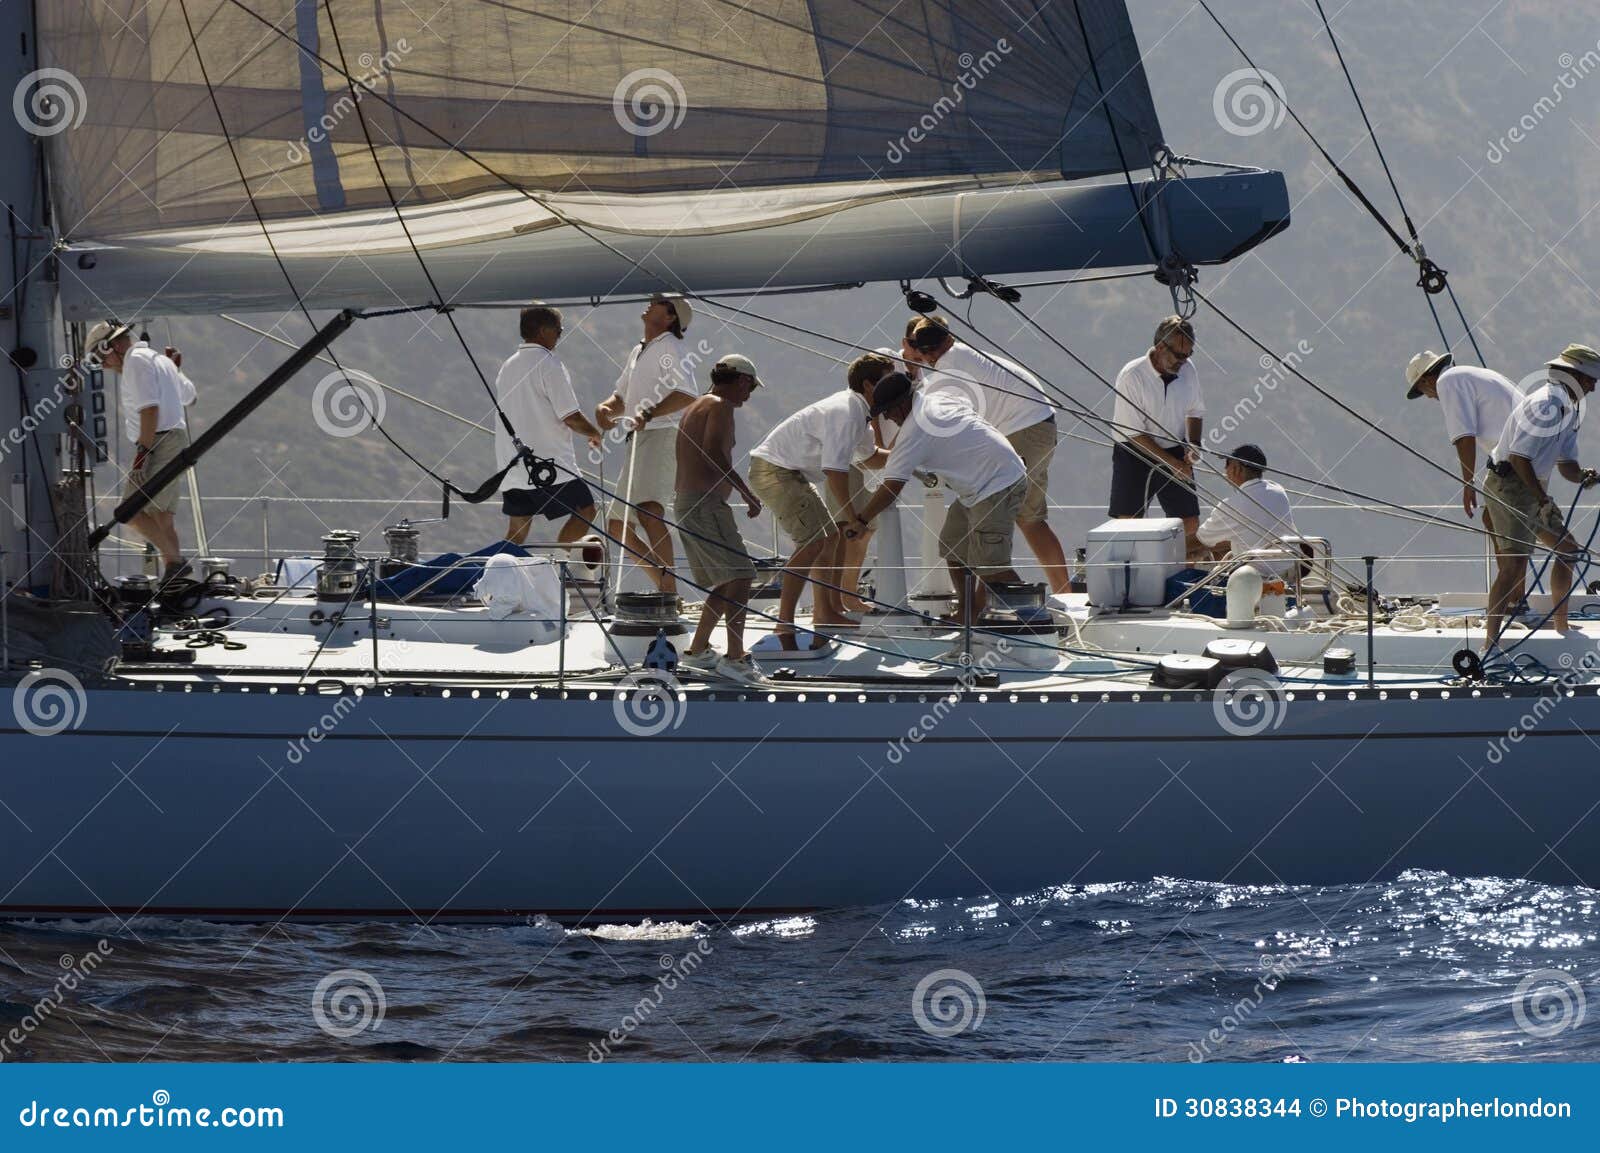 Crew Working On Sailboat Stock Images - Image: 30838344